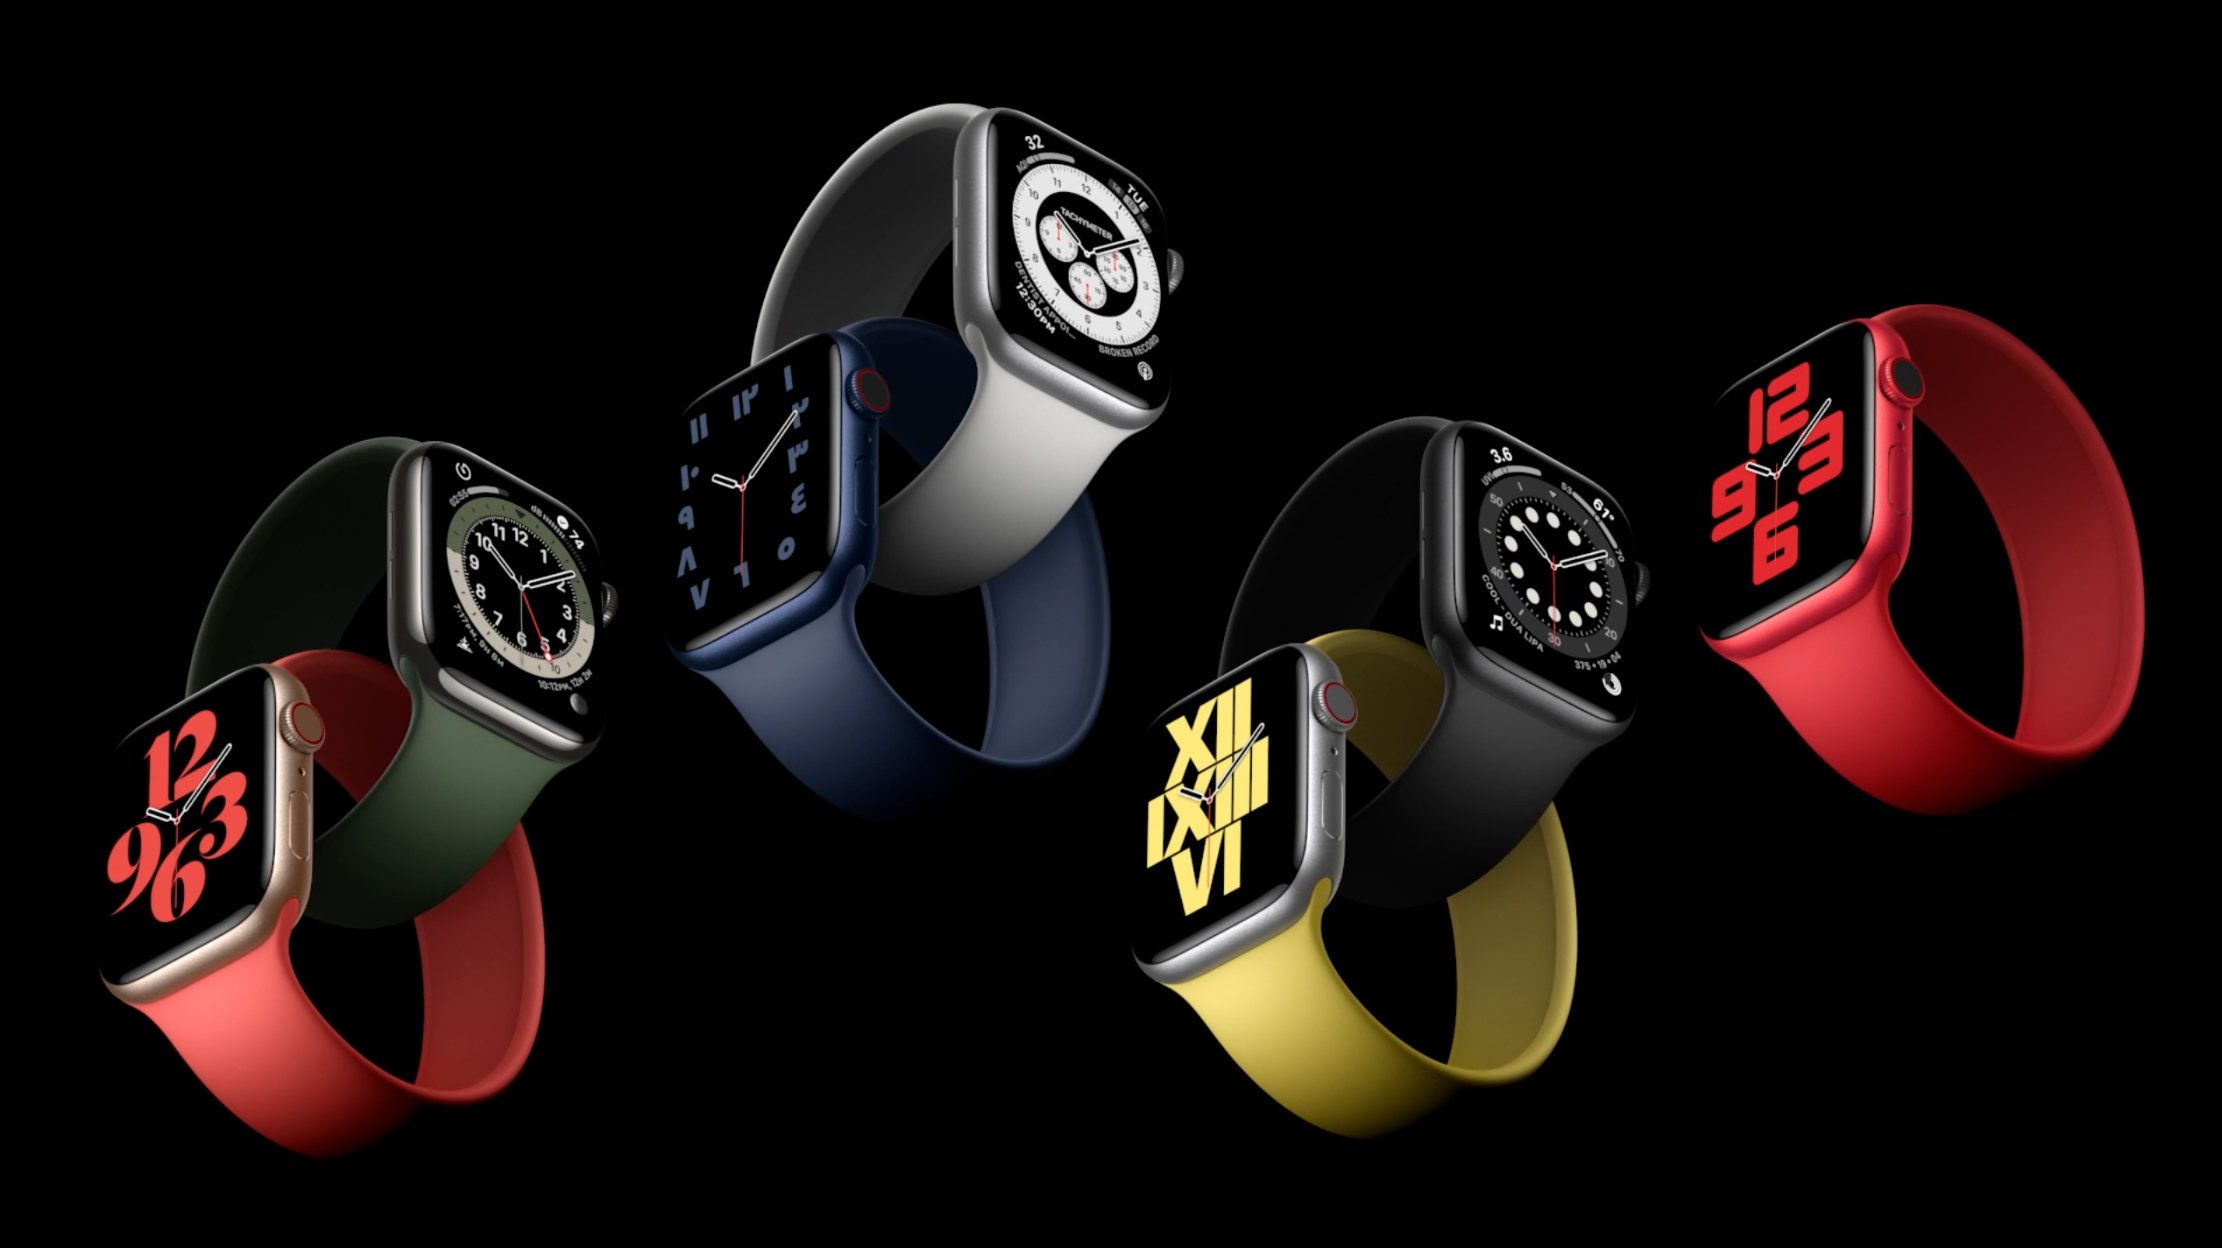 ​The new Apple Watch Series 6